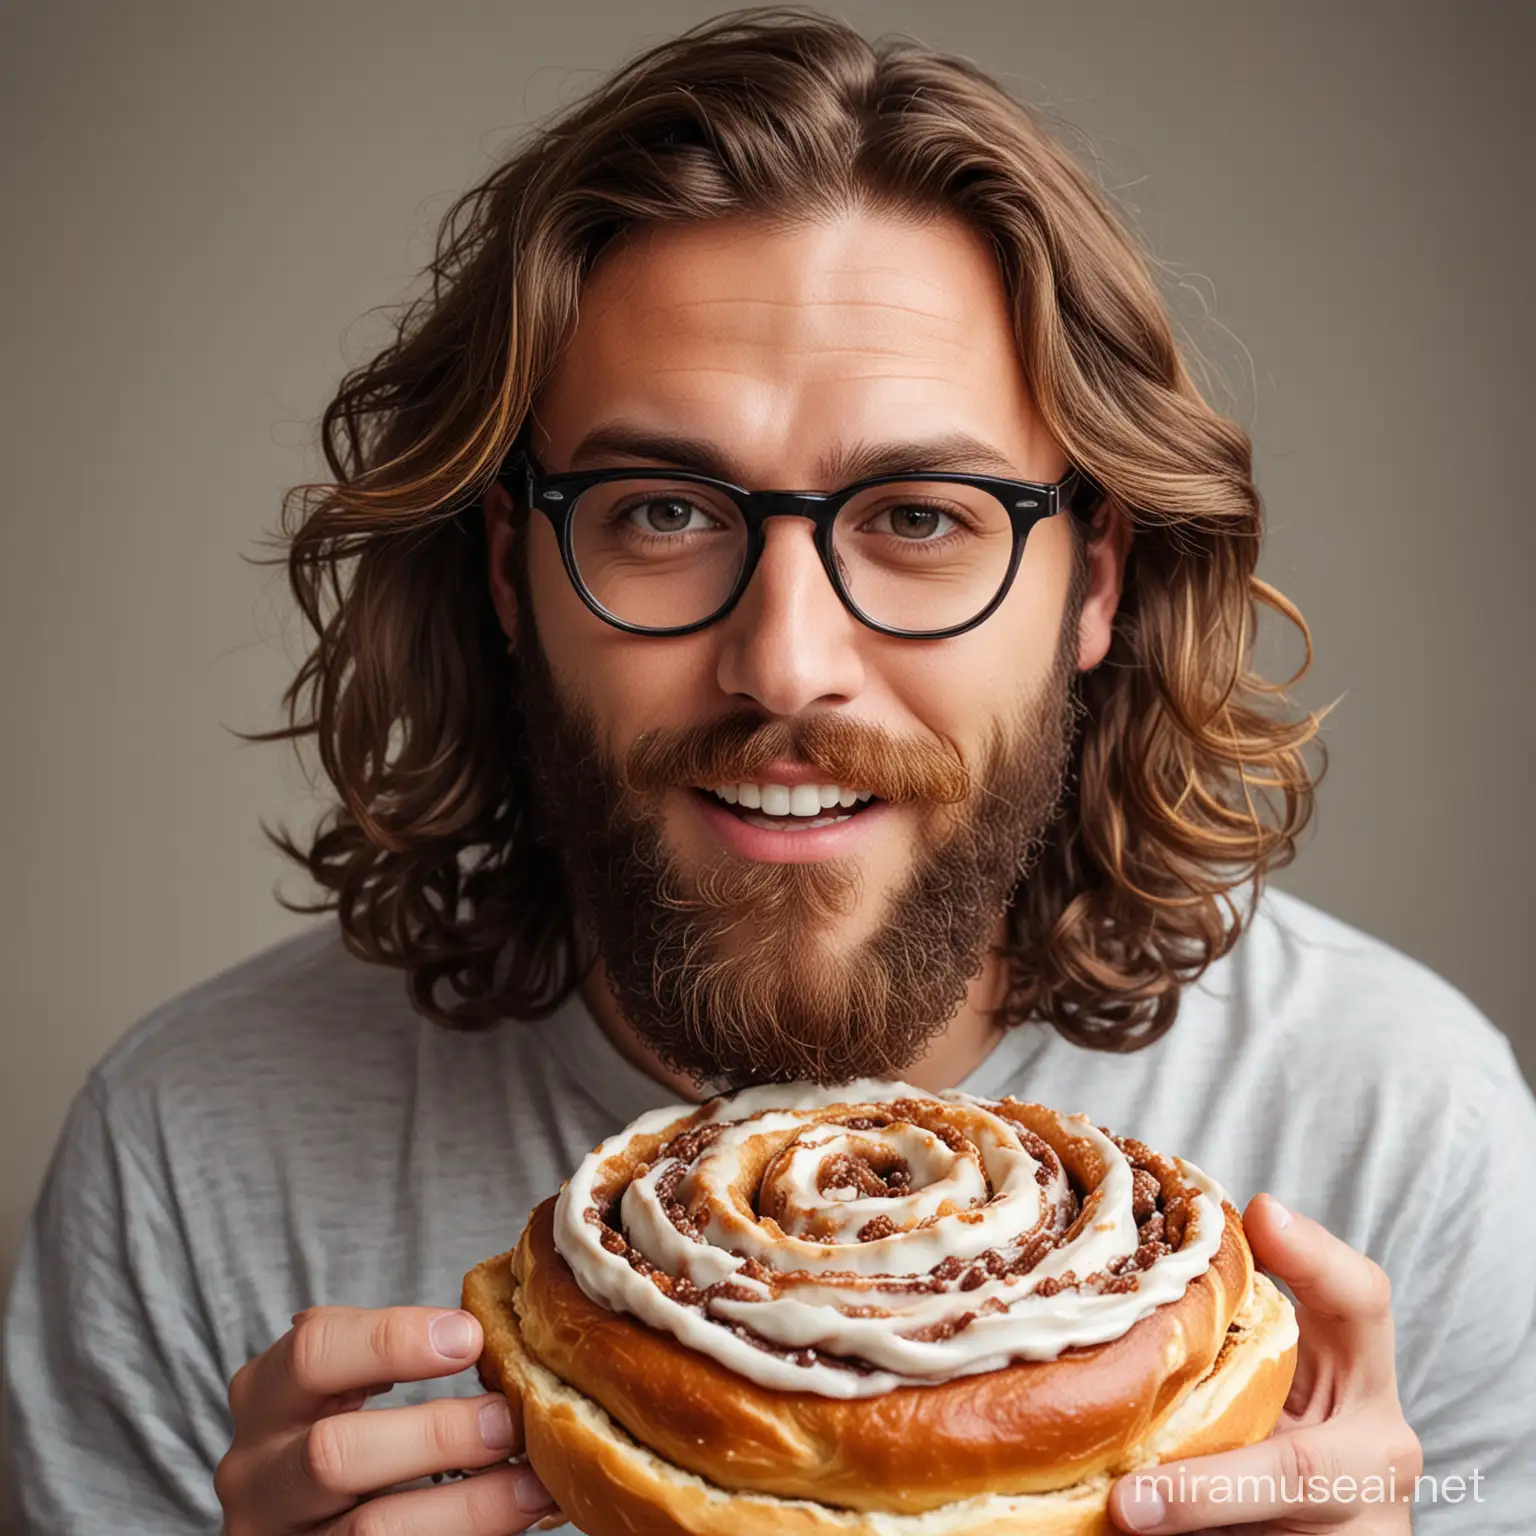 a bearded brunette man with long wavy hair and black-rimmed glasses eating a gigantic cinnamon roll